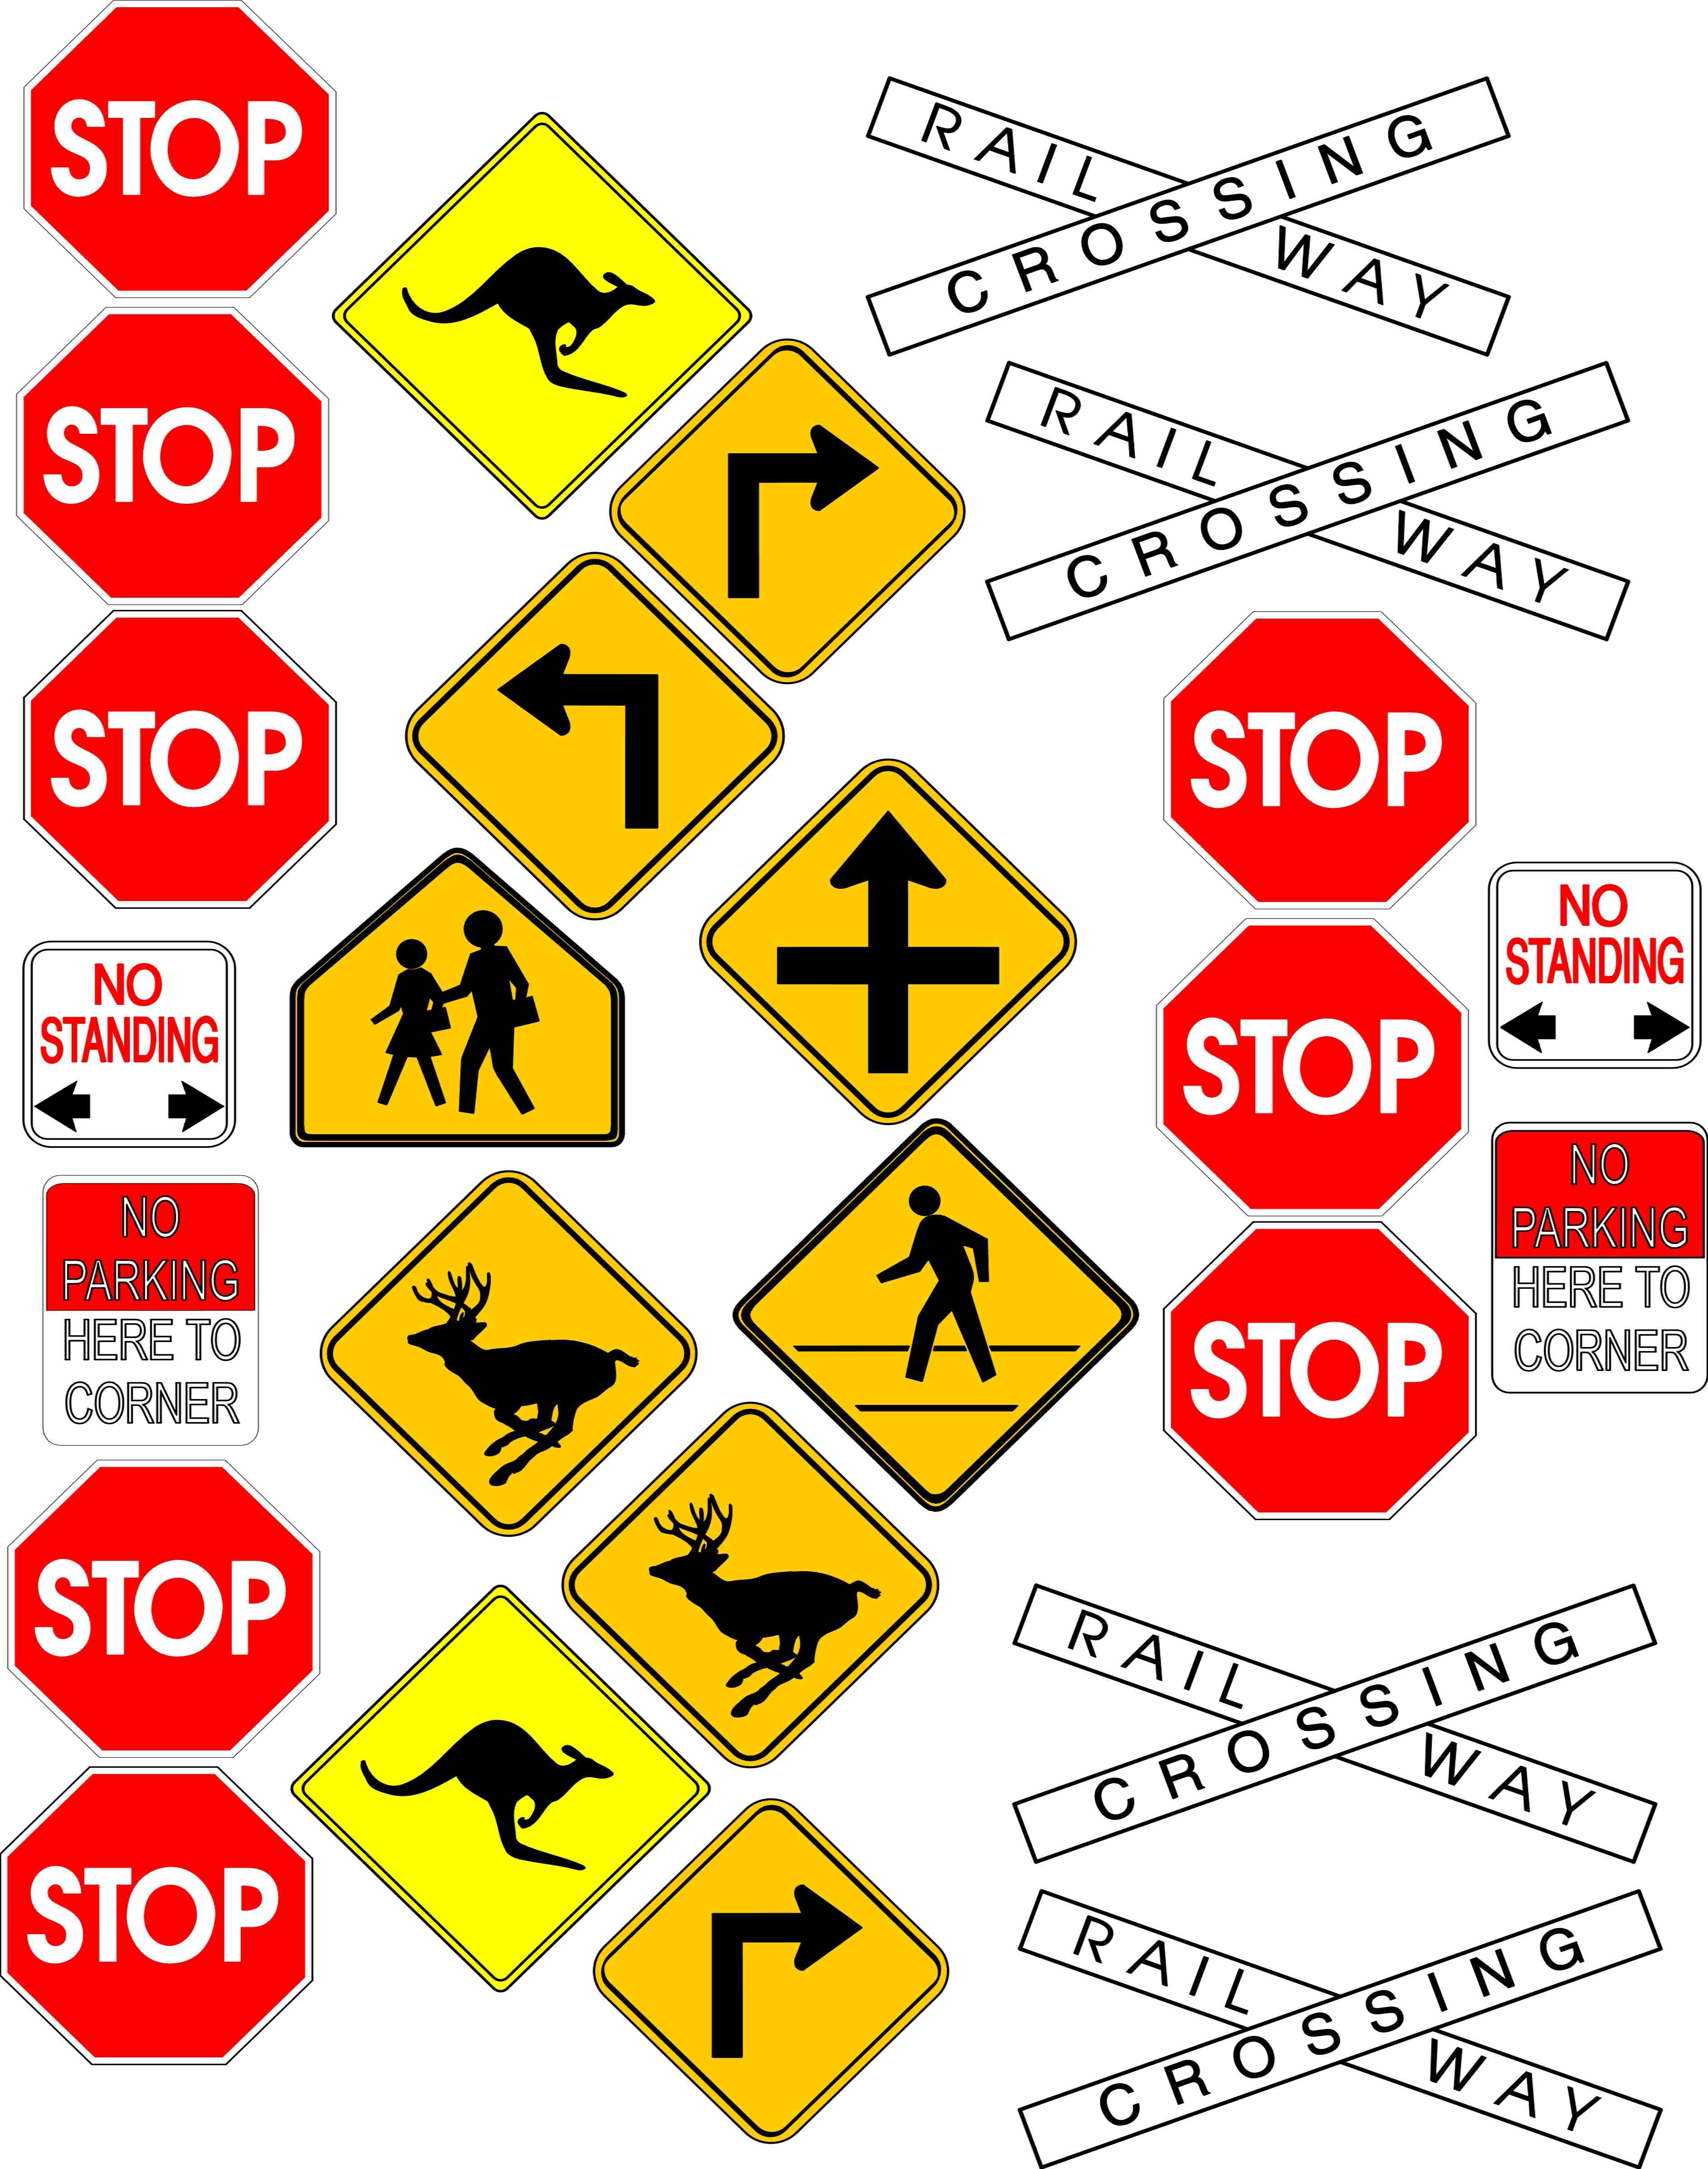 Street Sign Meanings   Free Cliparts That You Can Download To You